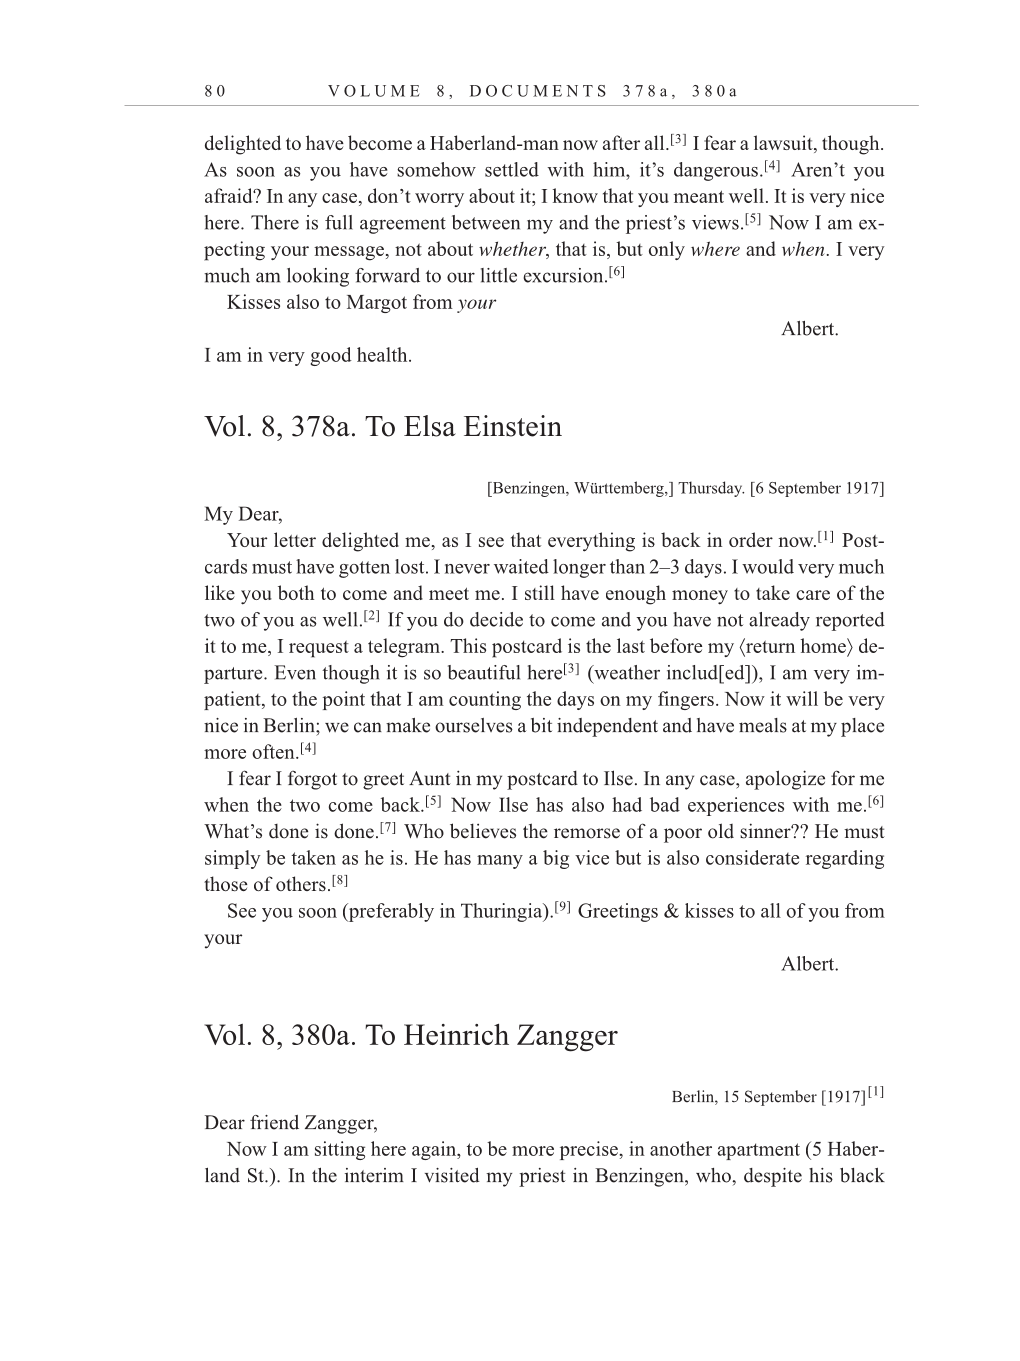 Volume 10: The Berlin Years: Correspondence, May-December 1920, and Supplementary Correspondence, 1909-1920 (English translation supplement) page 80